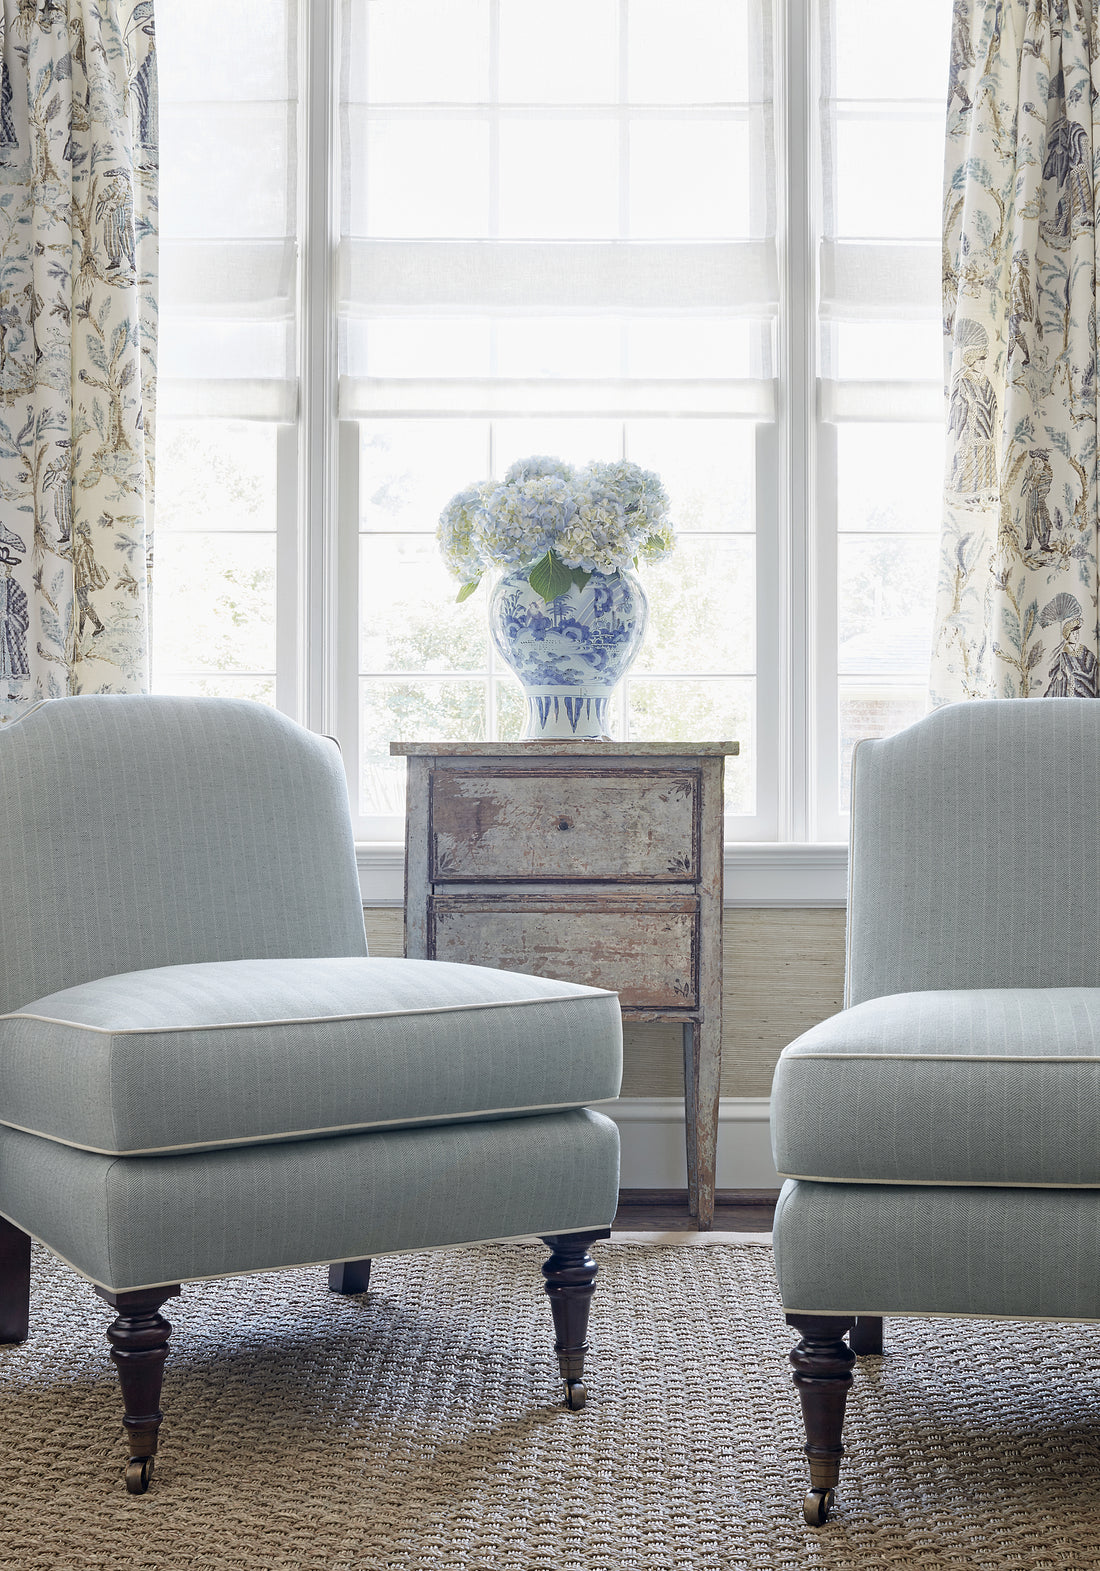 Charlotte Chair in Hamilton Herringbone woven fabric in aqua color - pattern number W80671 by Thibaut in the Pinnacle collection